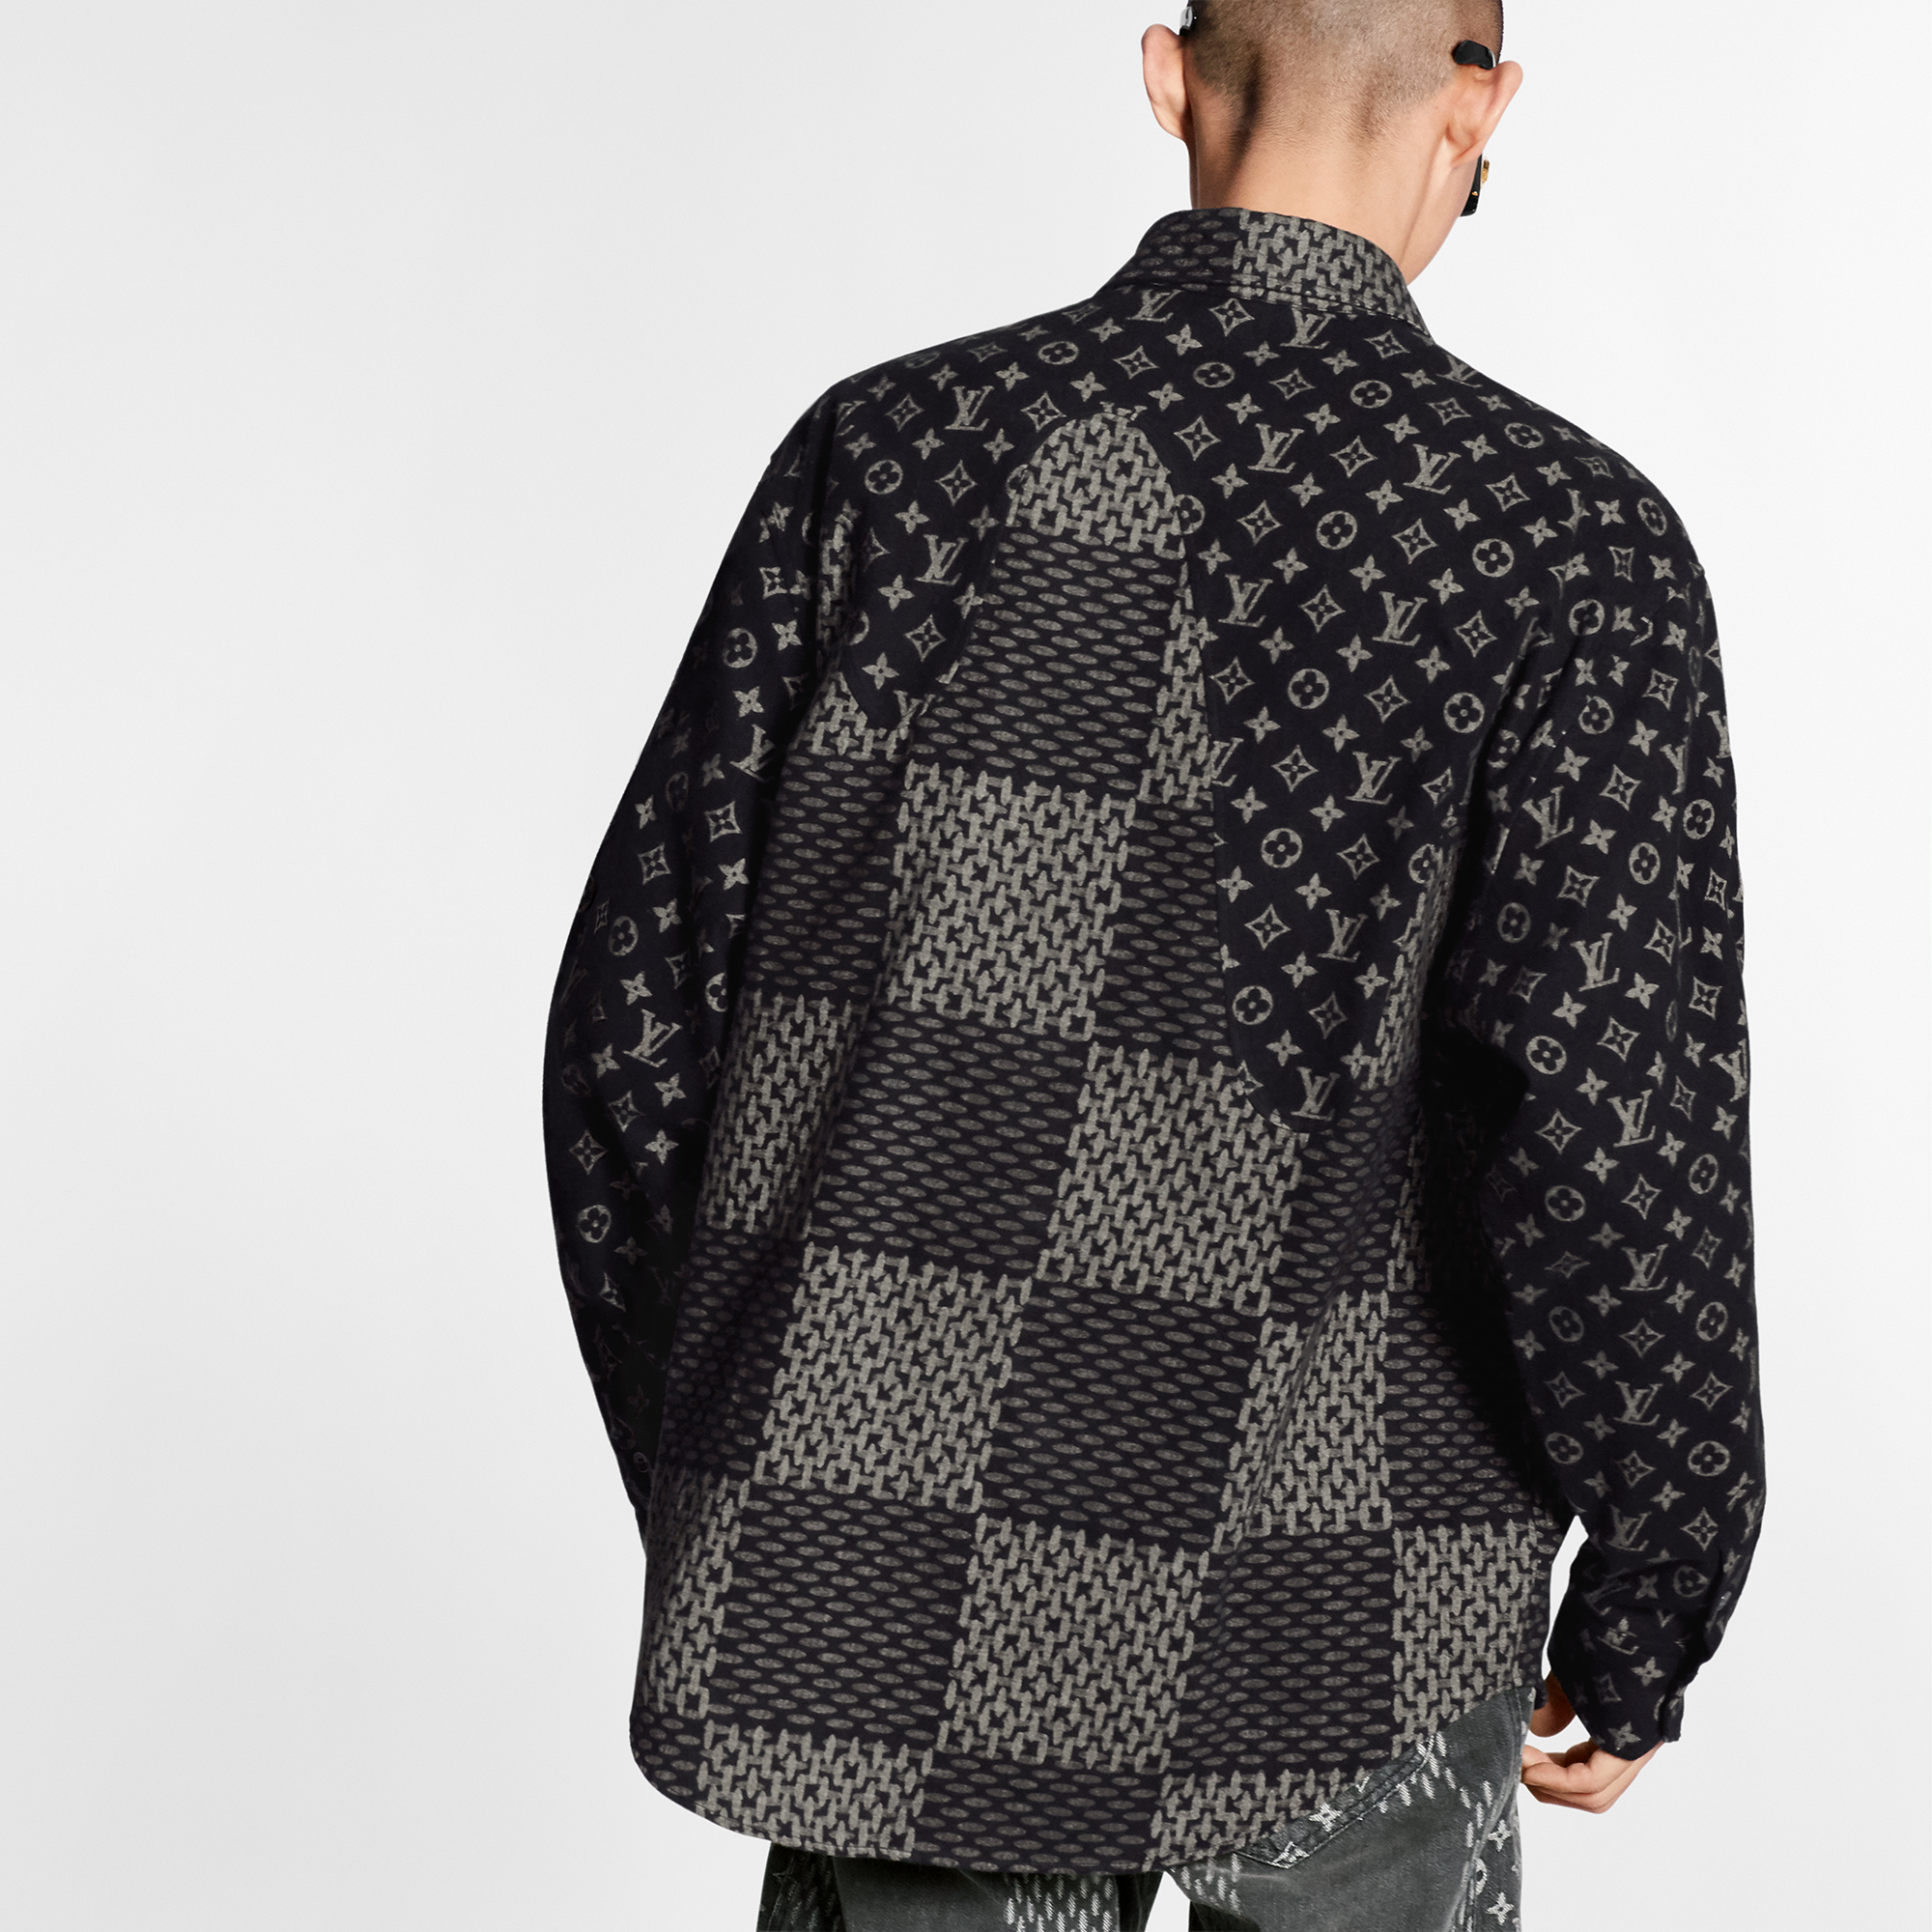 Virgil Abloh And Nigo Collaborate On Chic New Louis Vuitton Line